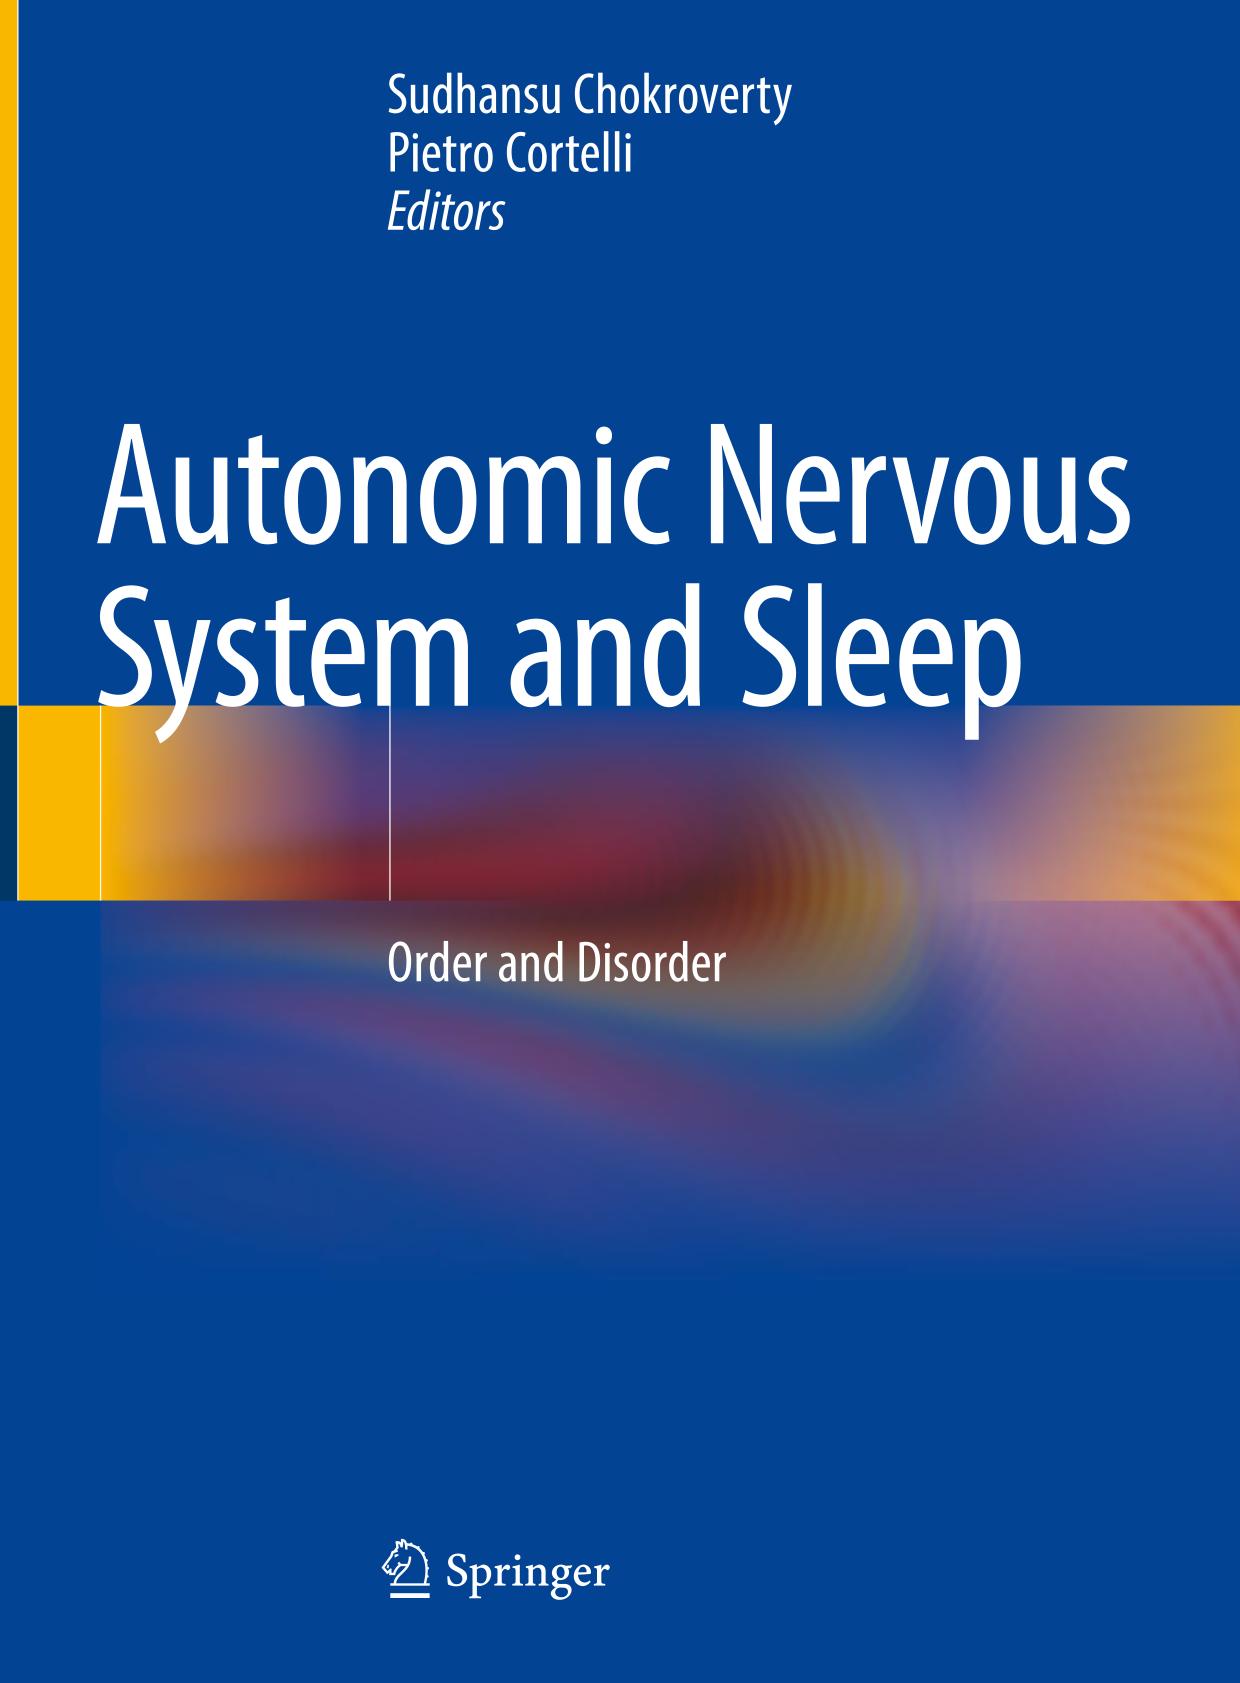 AUTONOMIC NERVOUS SYSTEM AND SLEEP : order and disorder